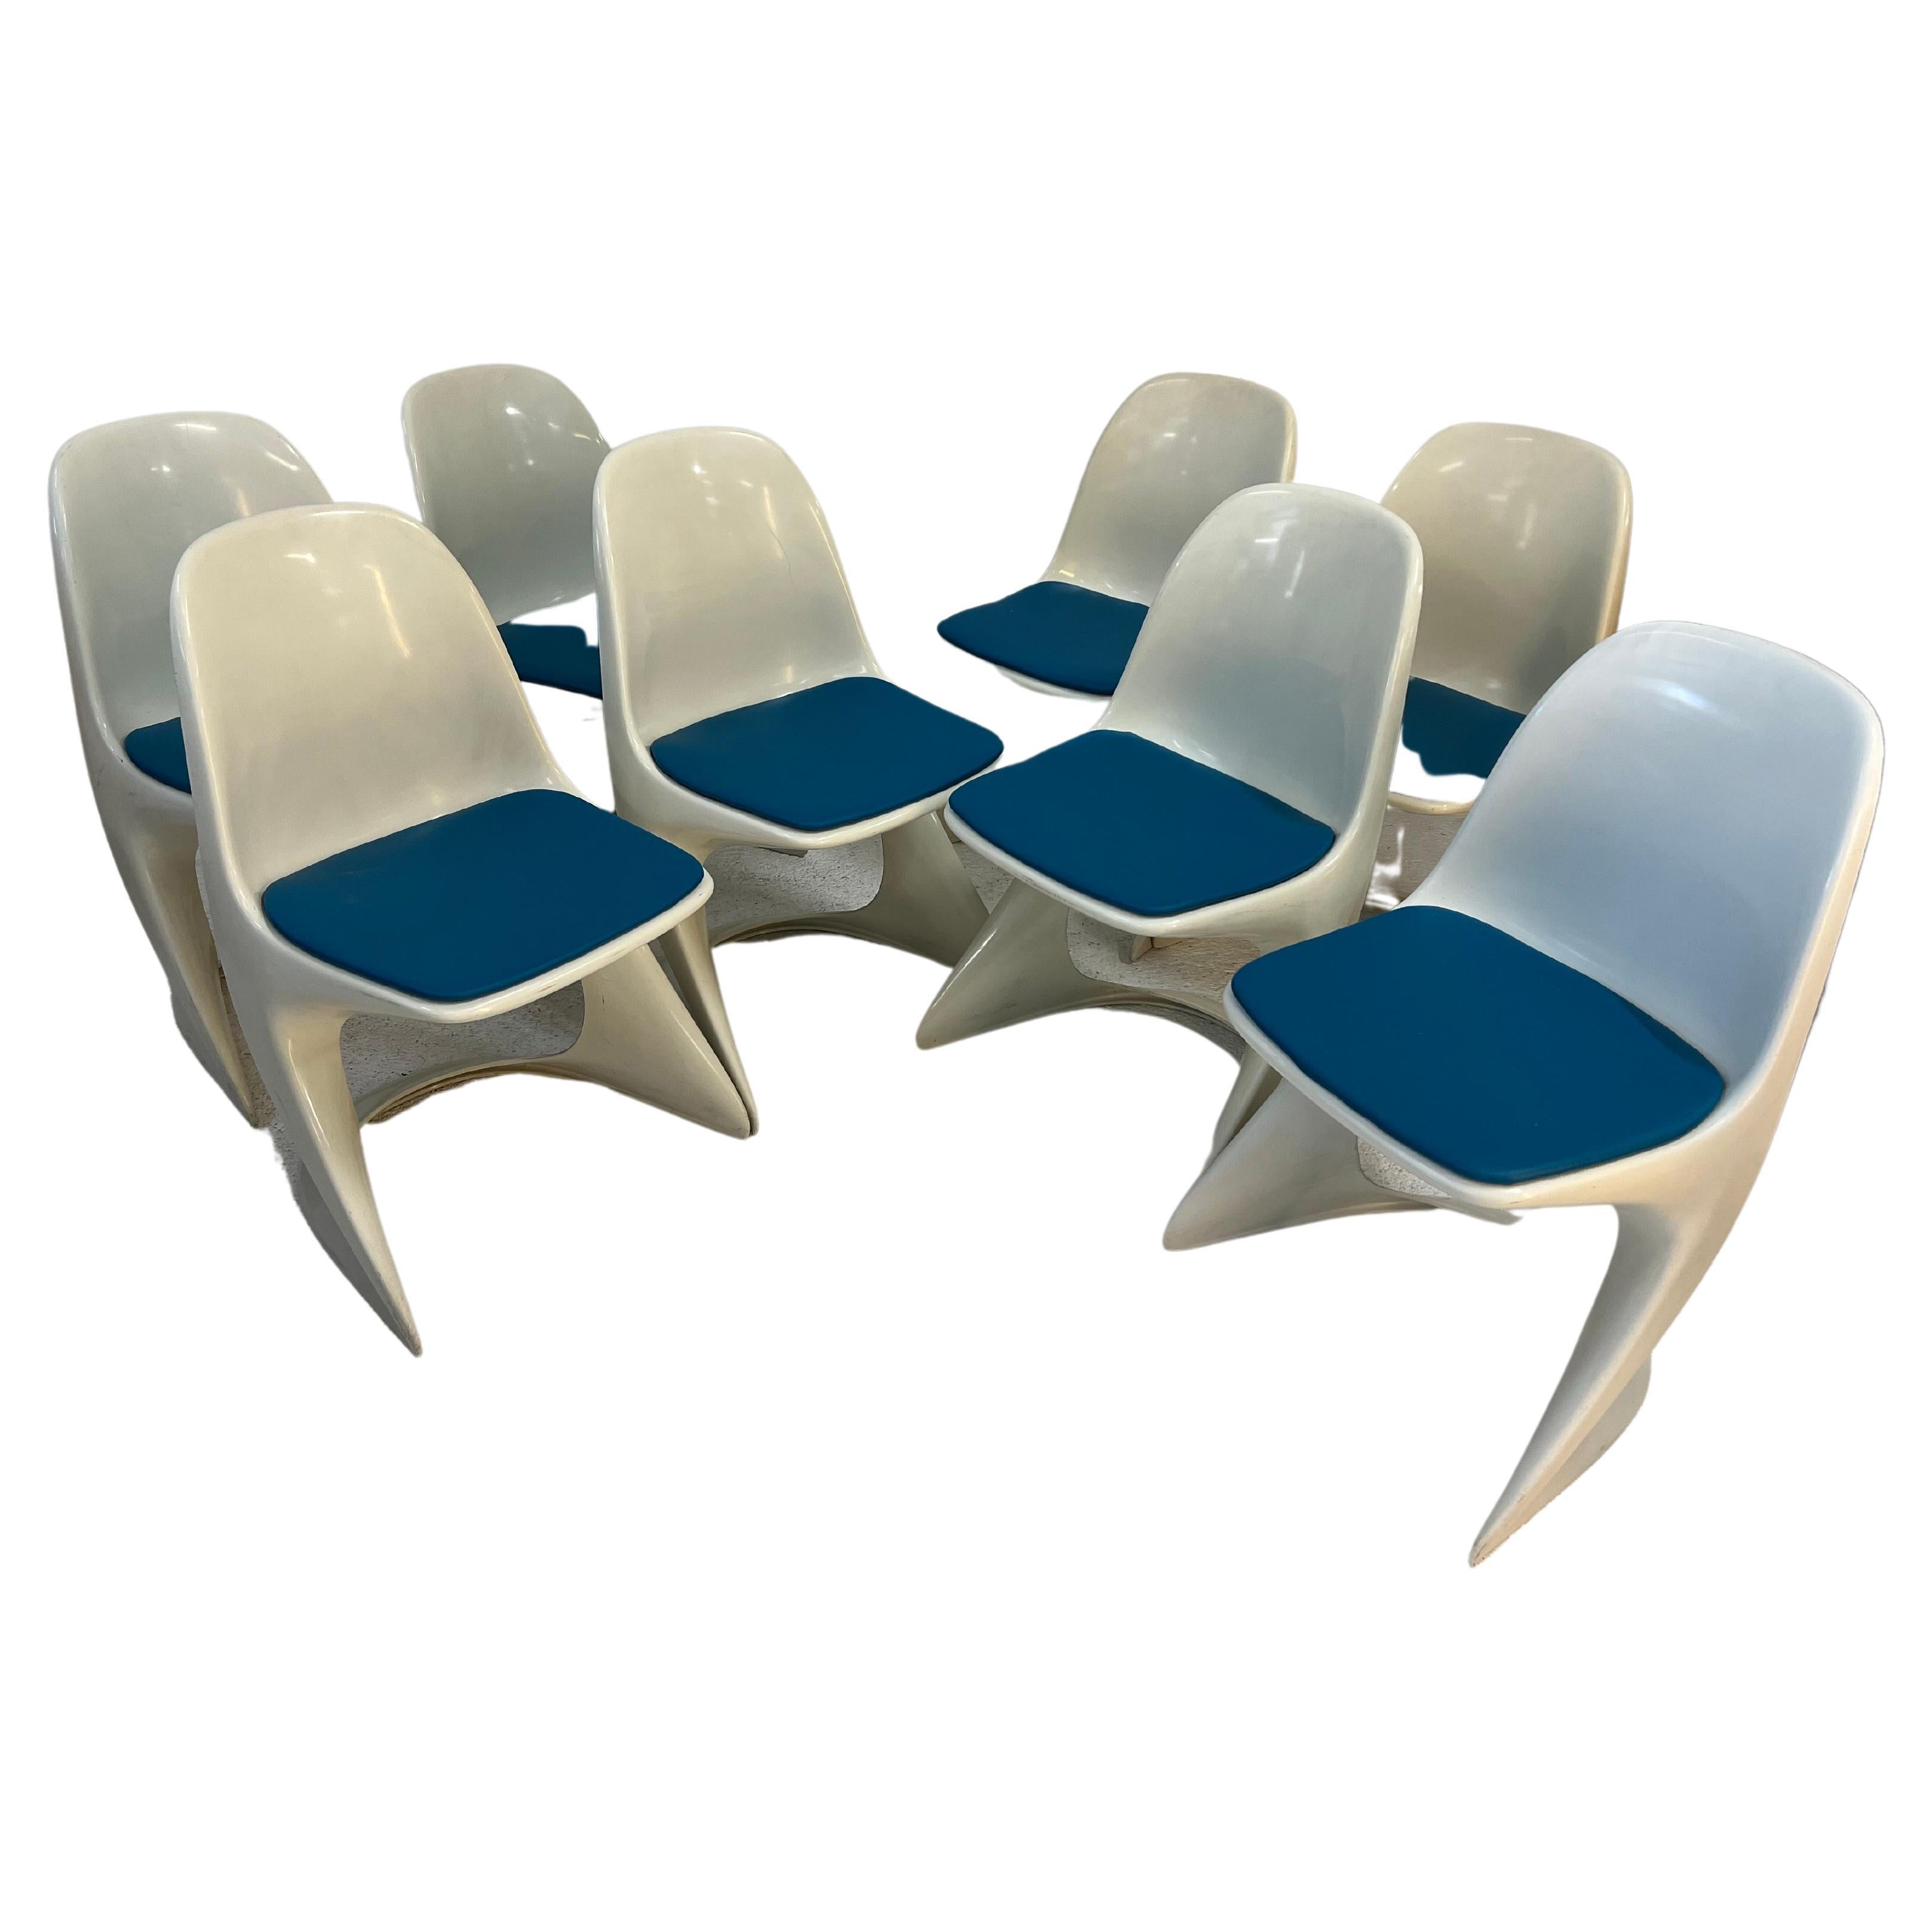 
The classic from the 1970s.
Original Casala chair model 2001/2002.
Designed by Alexander Begge for Casala. Made in W. Germany 

series of 8 Casala chairs in resin by Alexander Begge
the cushions have been redone in skai in a petrol blue
the base is